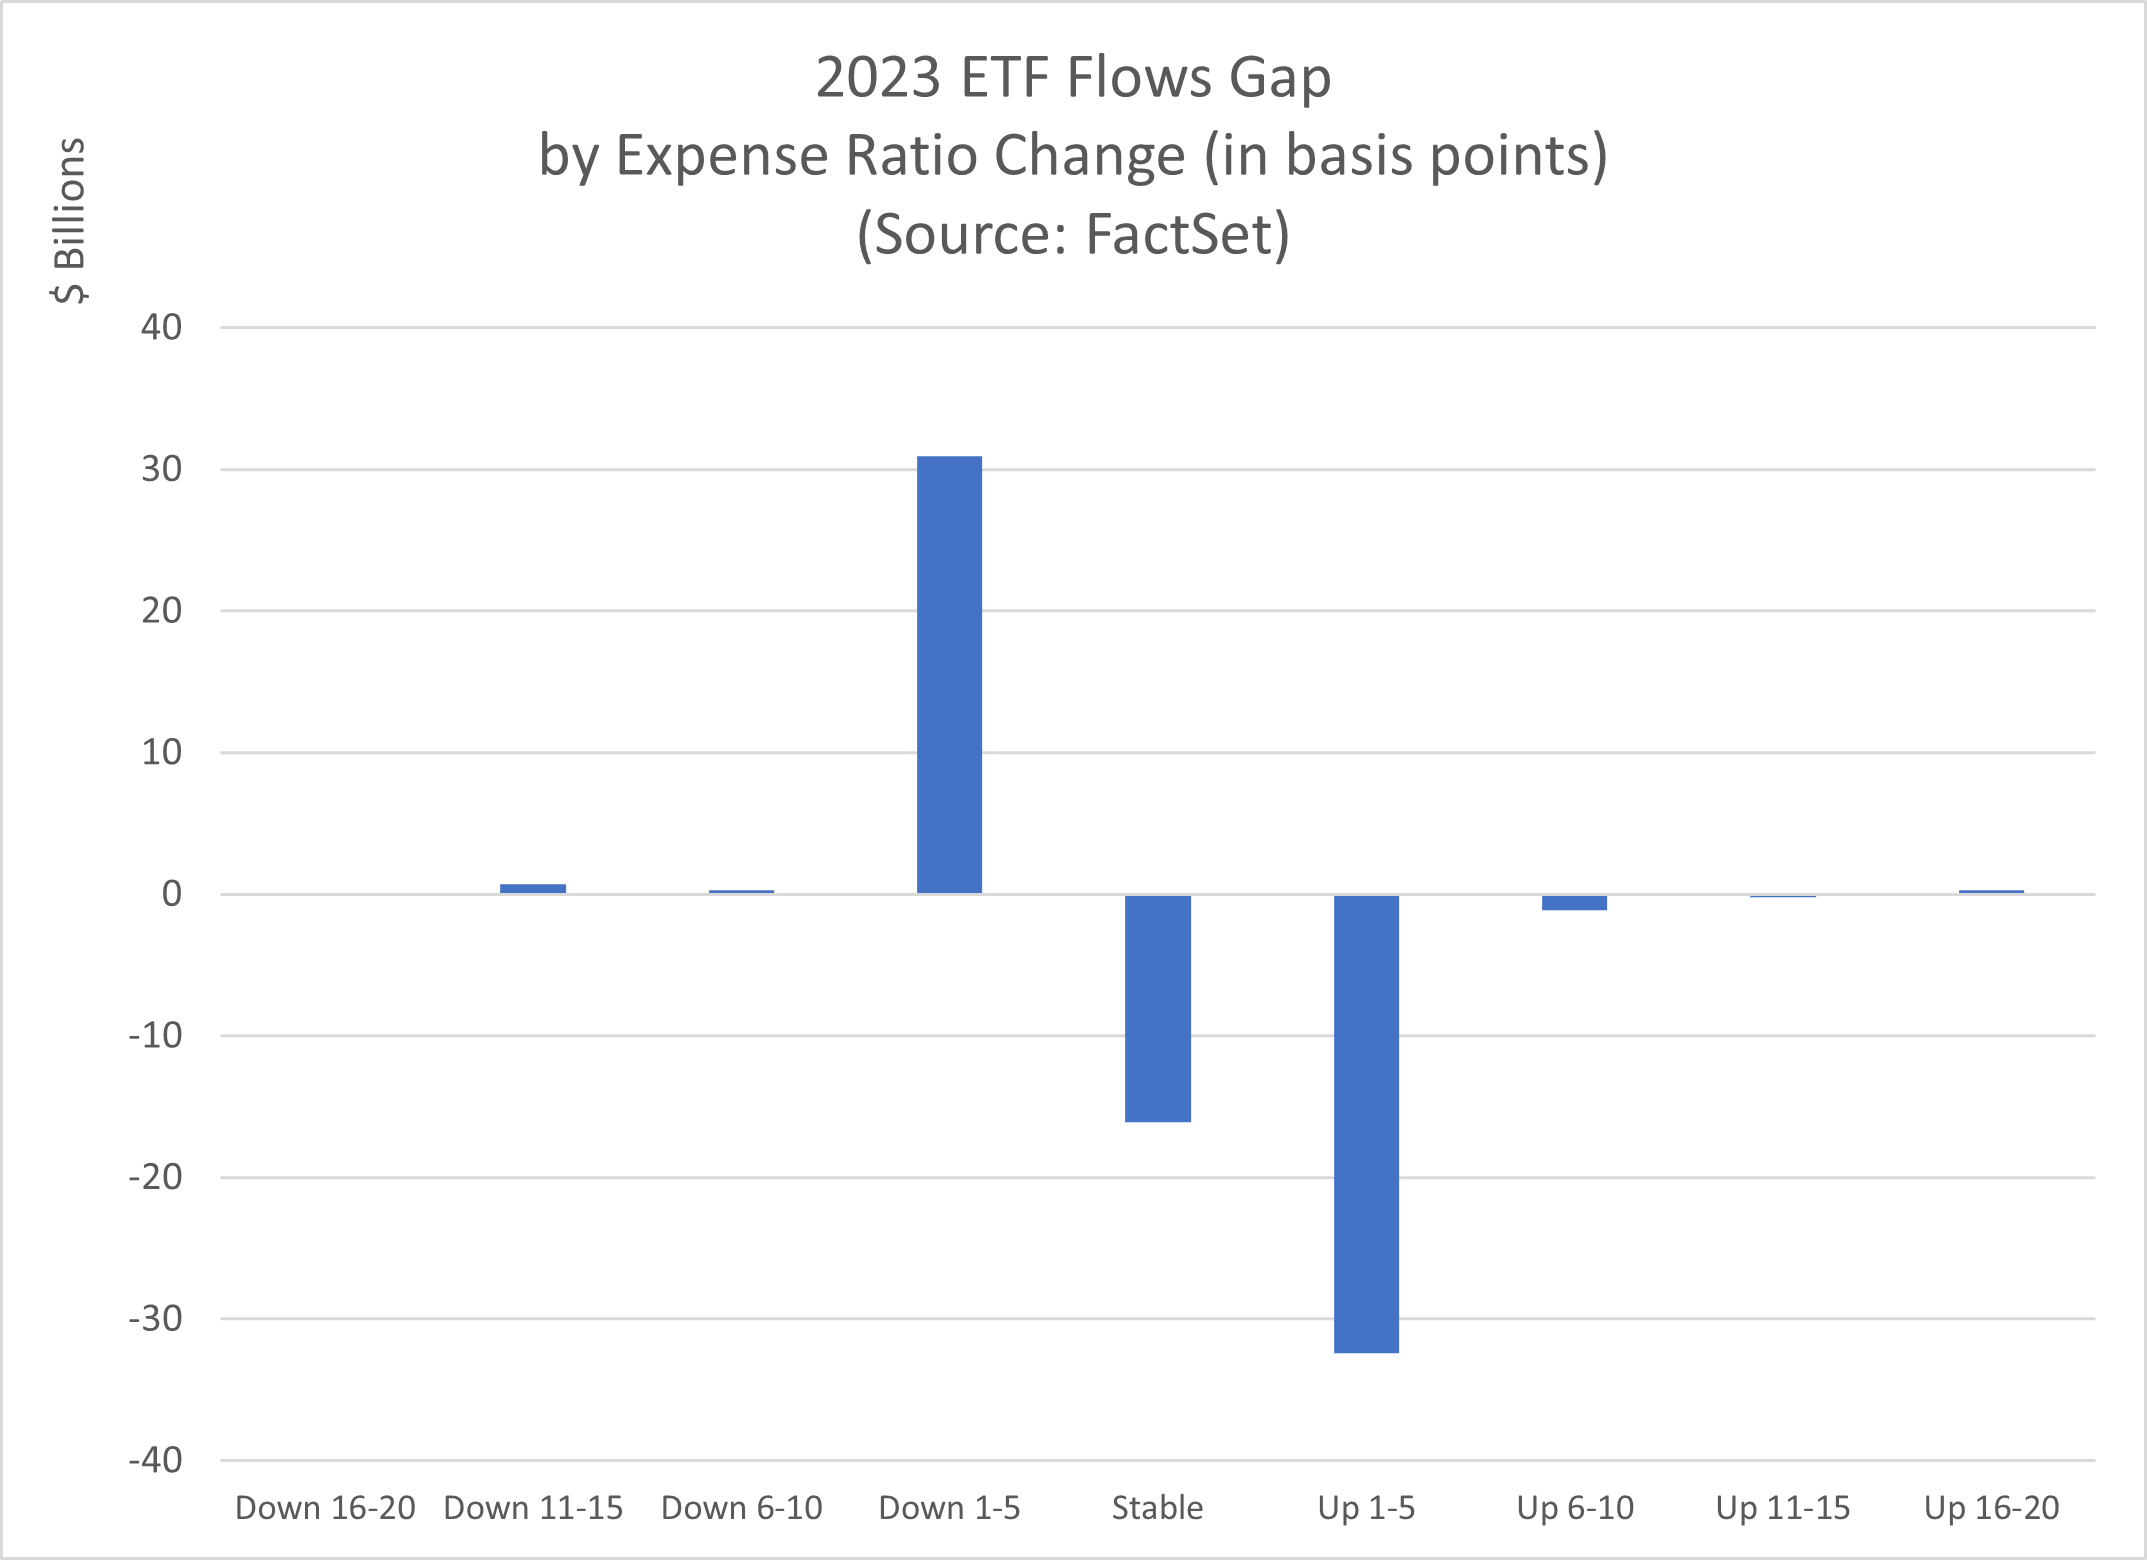 10-2023-etf-flows-gap-by-expense-ratio-change